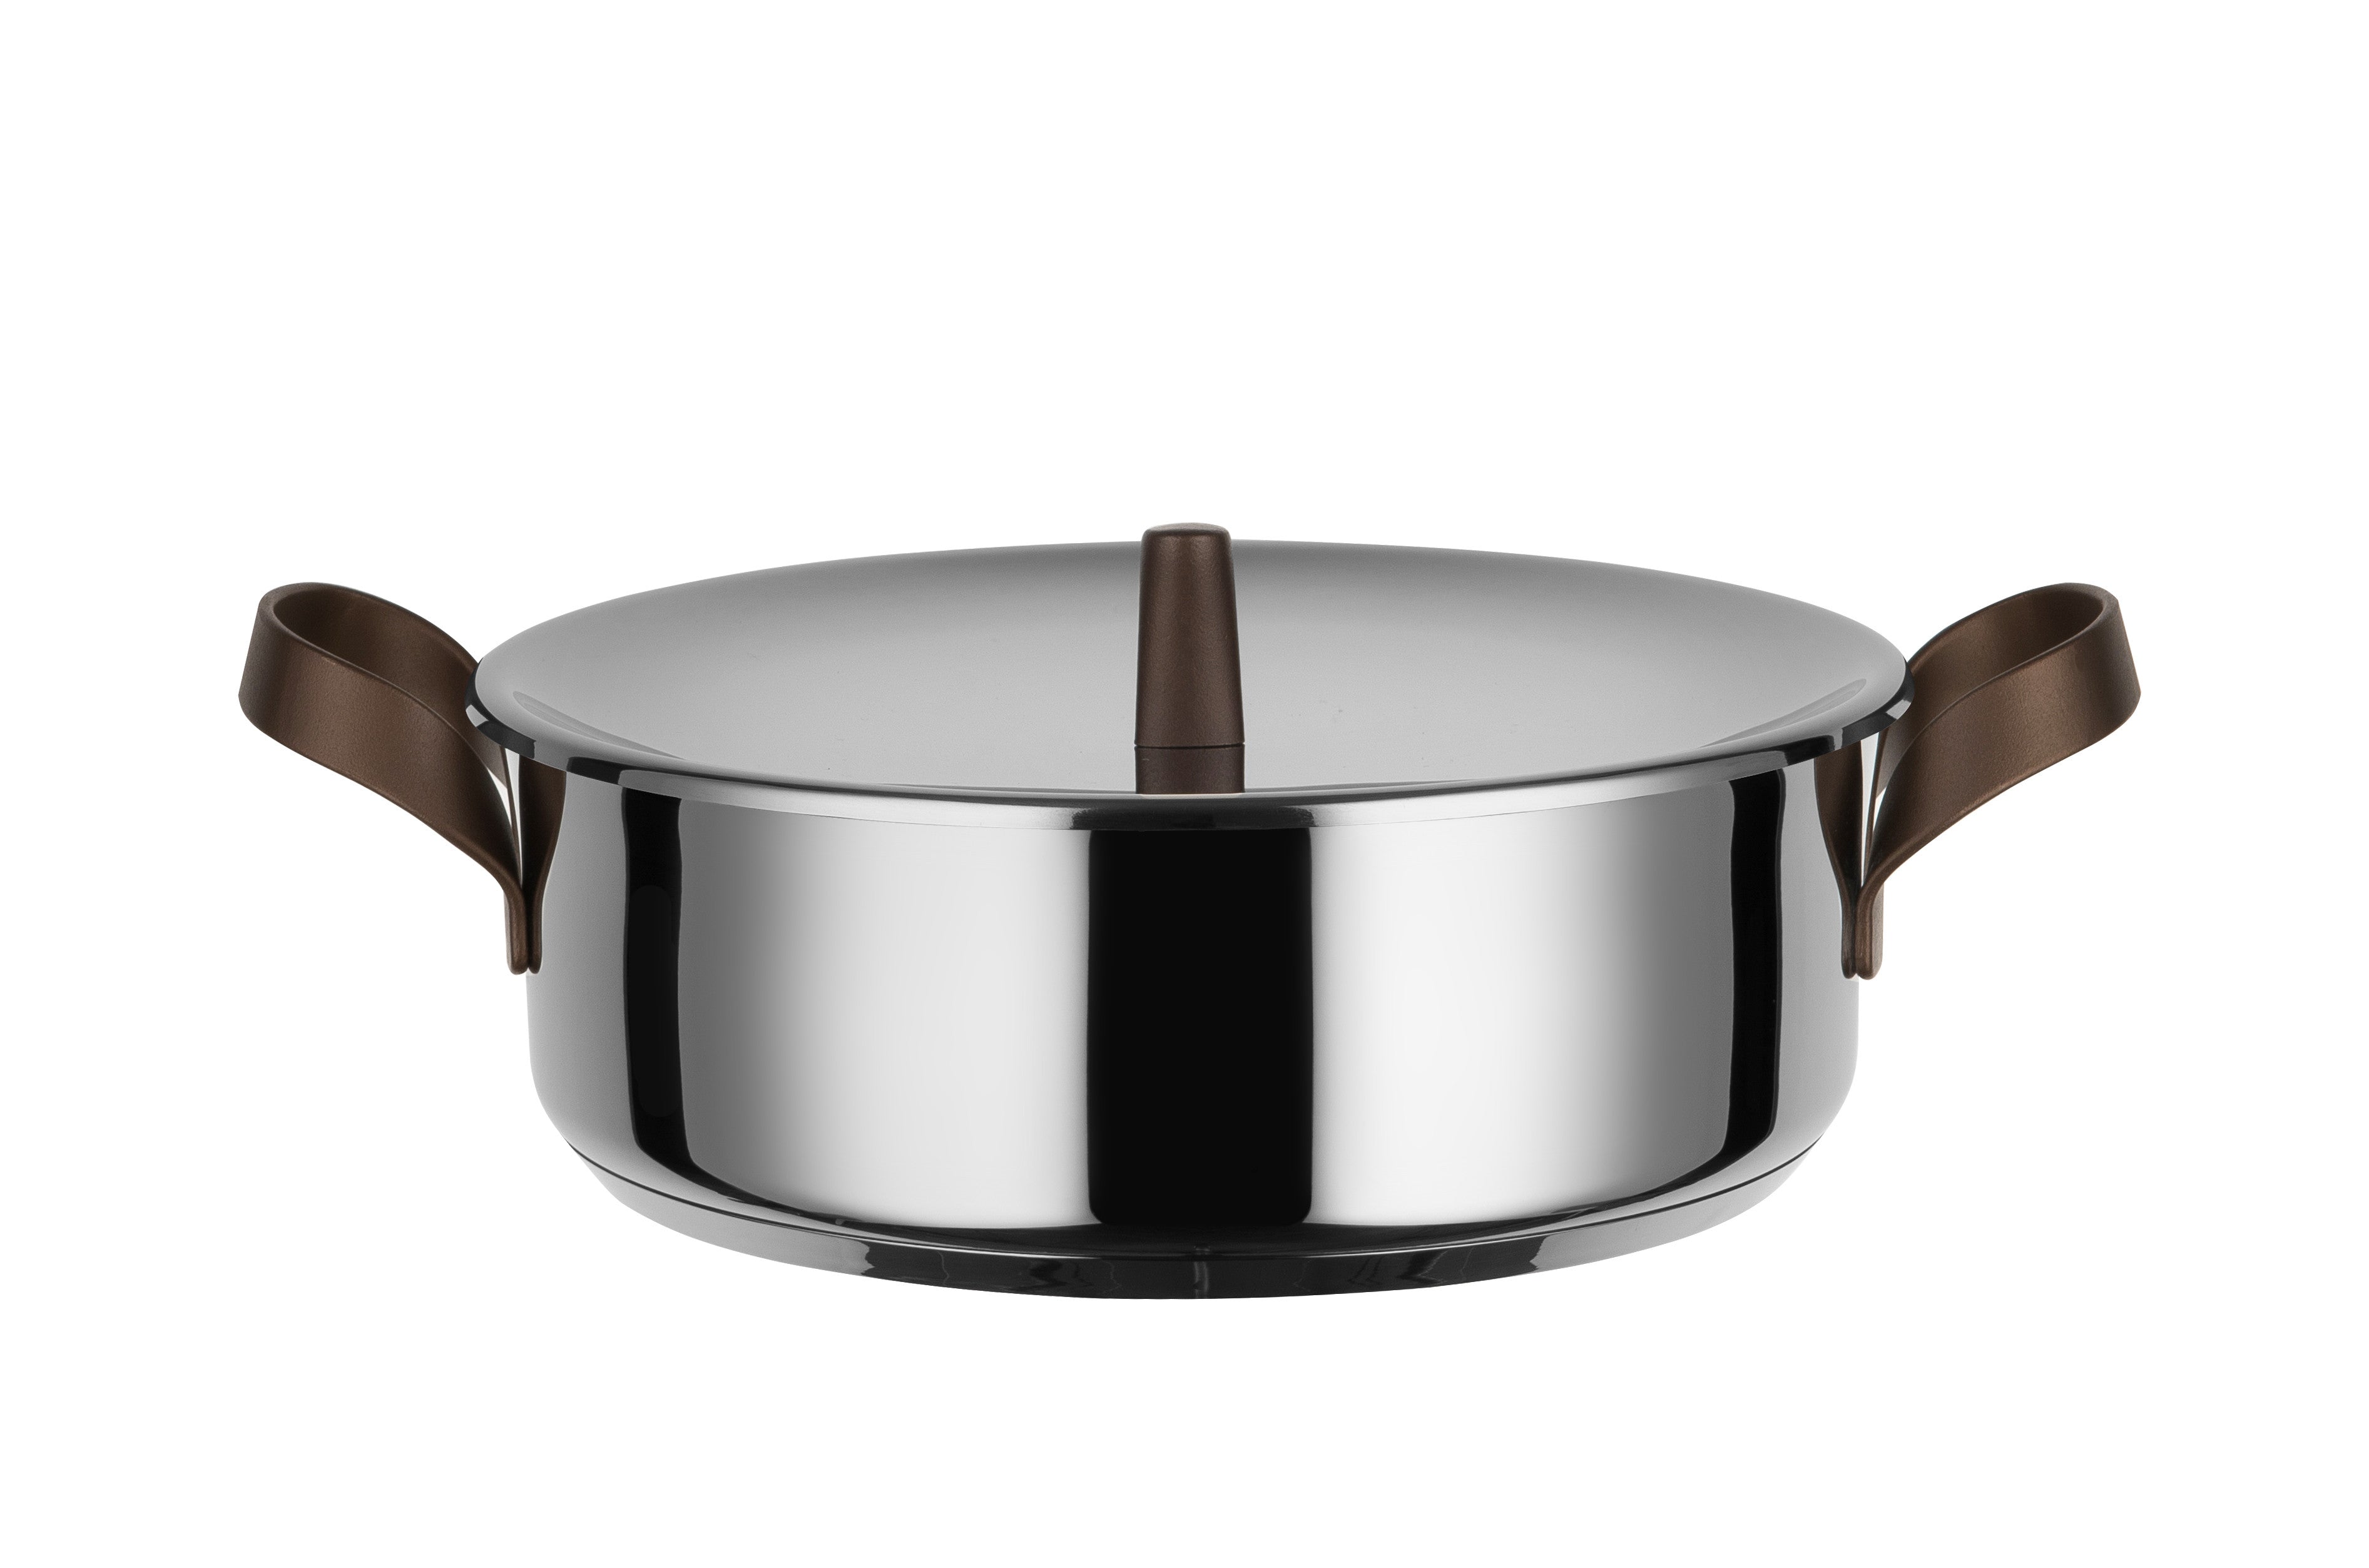 Alessi Edo Casserole with Two Handles in Stainless Steel, cm 28